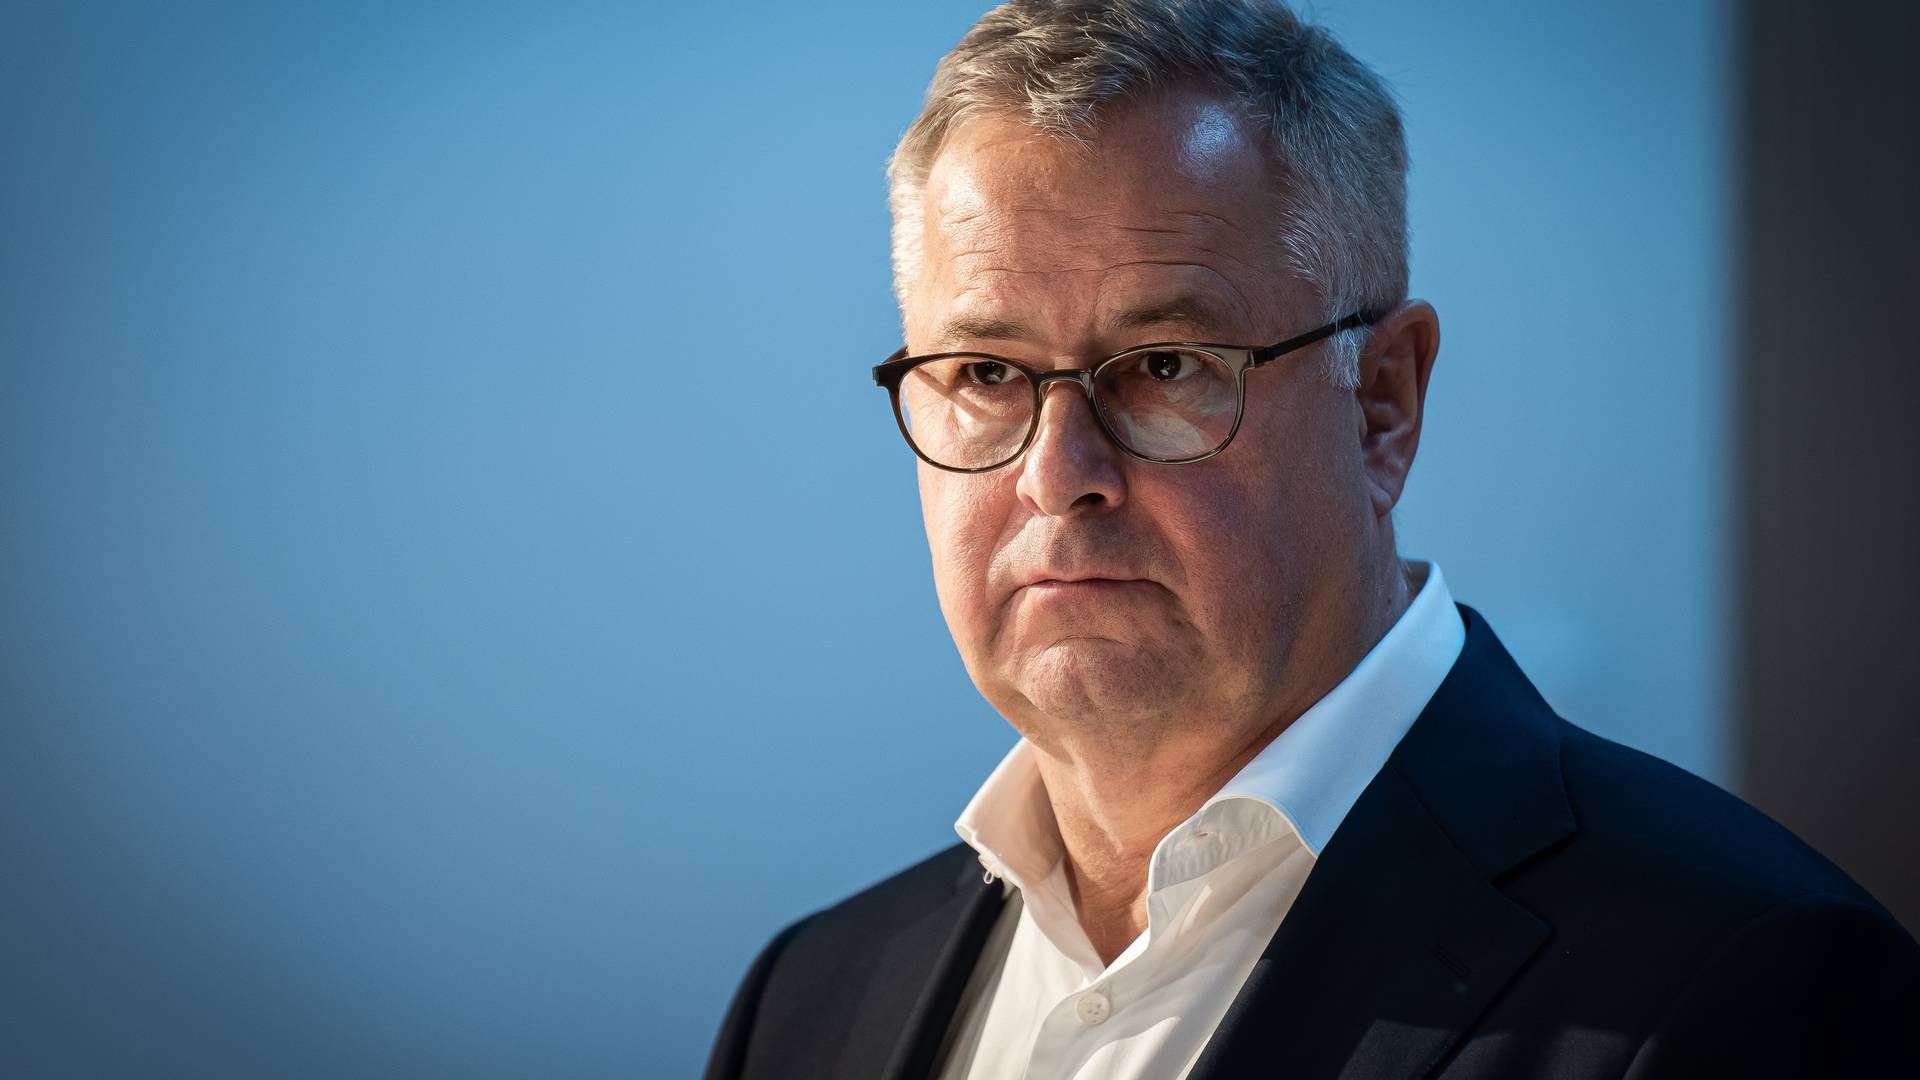 Søren Skou steps down as CEO of Maersk after more than six years at the helm of the Danish shipping giant. | Photo: Emil Helms/Ritzau Scanpix